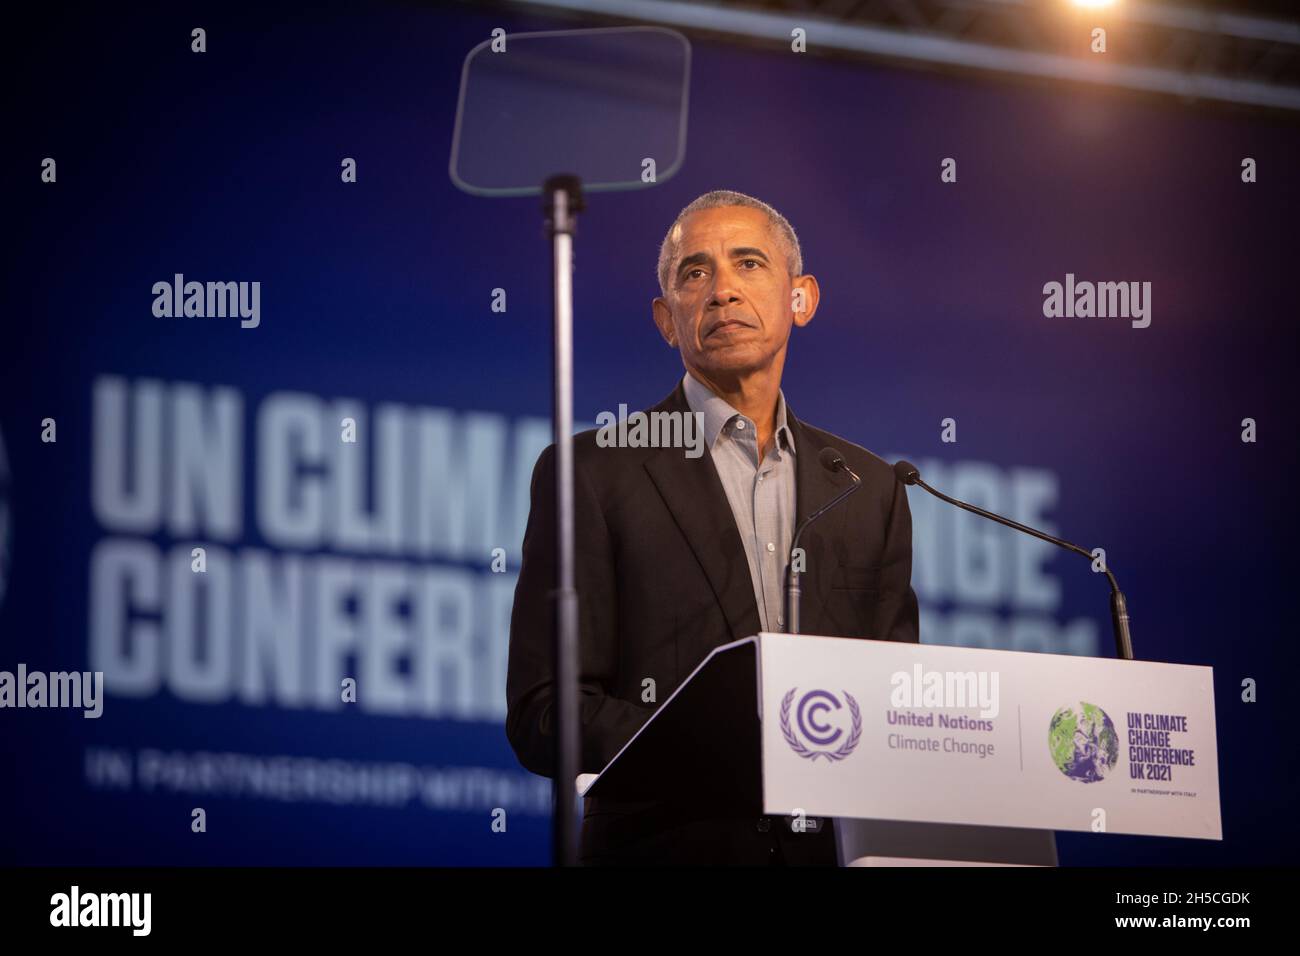 Glasgow, Scotland, UK. Barack Obama, former President of the United States of America, speaks at the 26th United Nations Climate Change Conference, known as COP26, in Glasgow, Scotland, UK, on 8 November 2021. Photo:Jeremy Sutton-Hibbert/Alamy Live News. Stock Photo